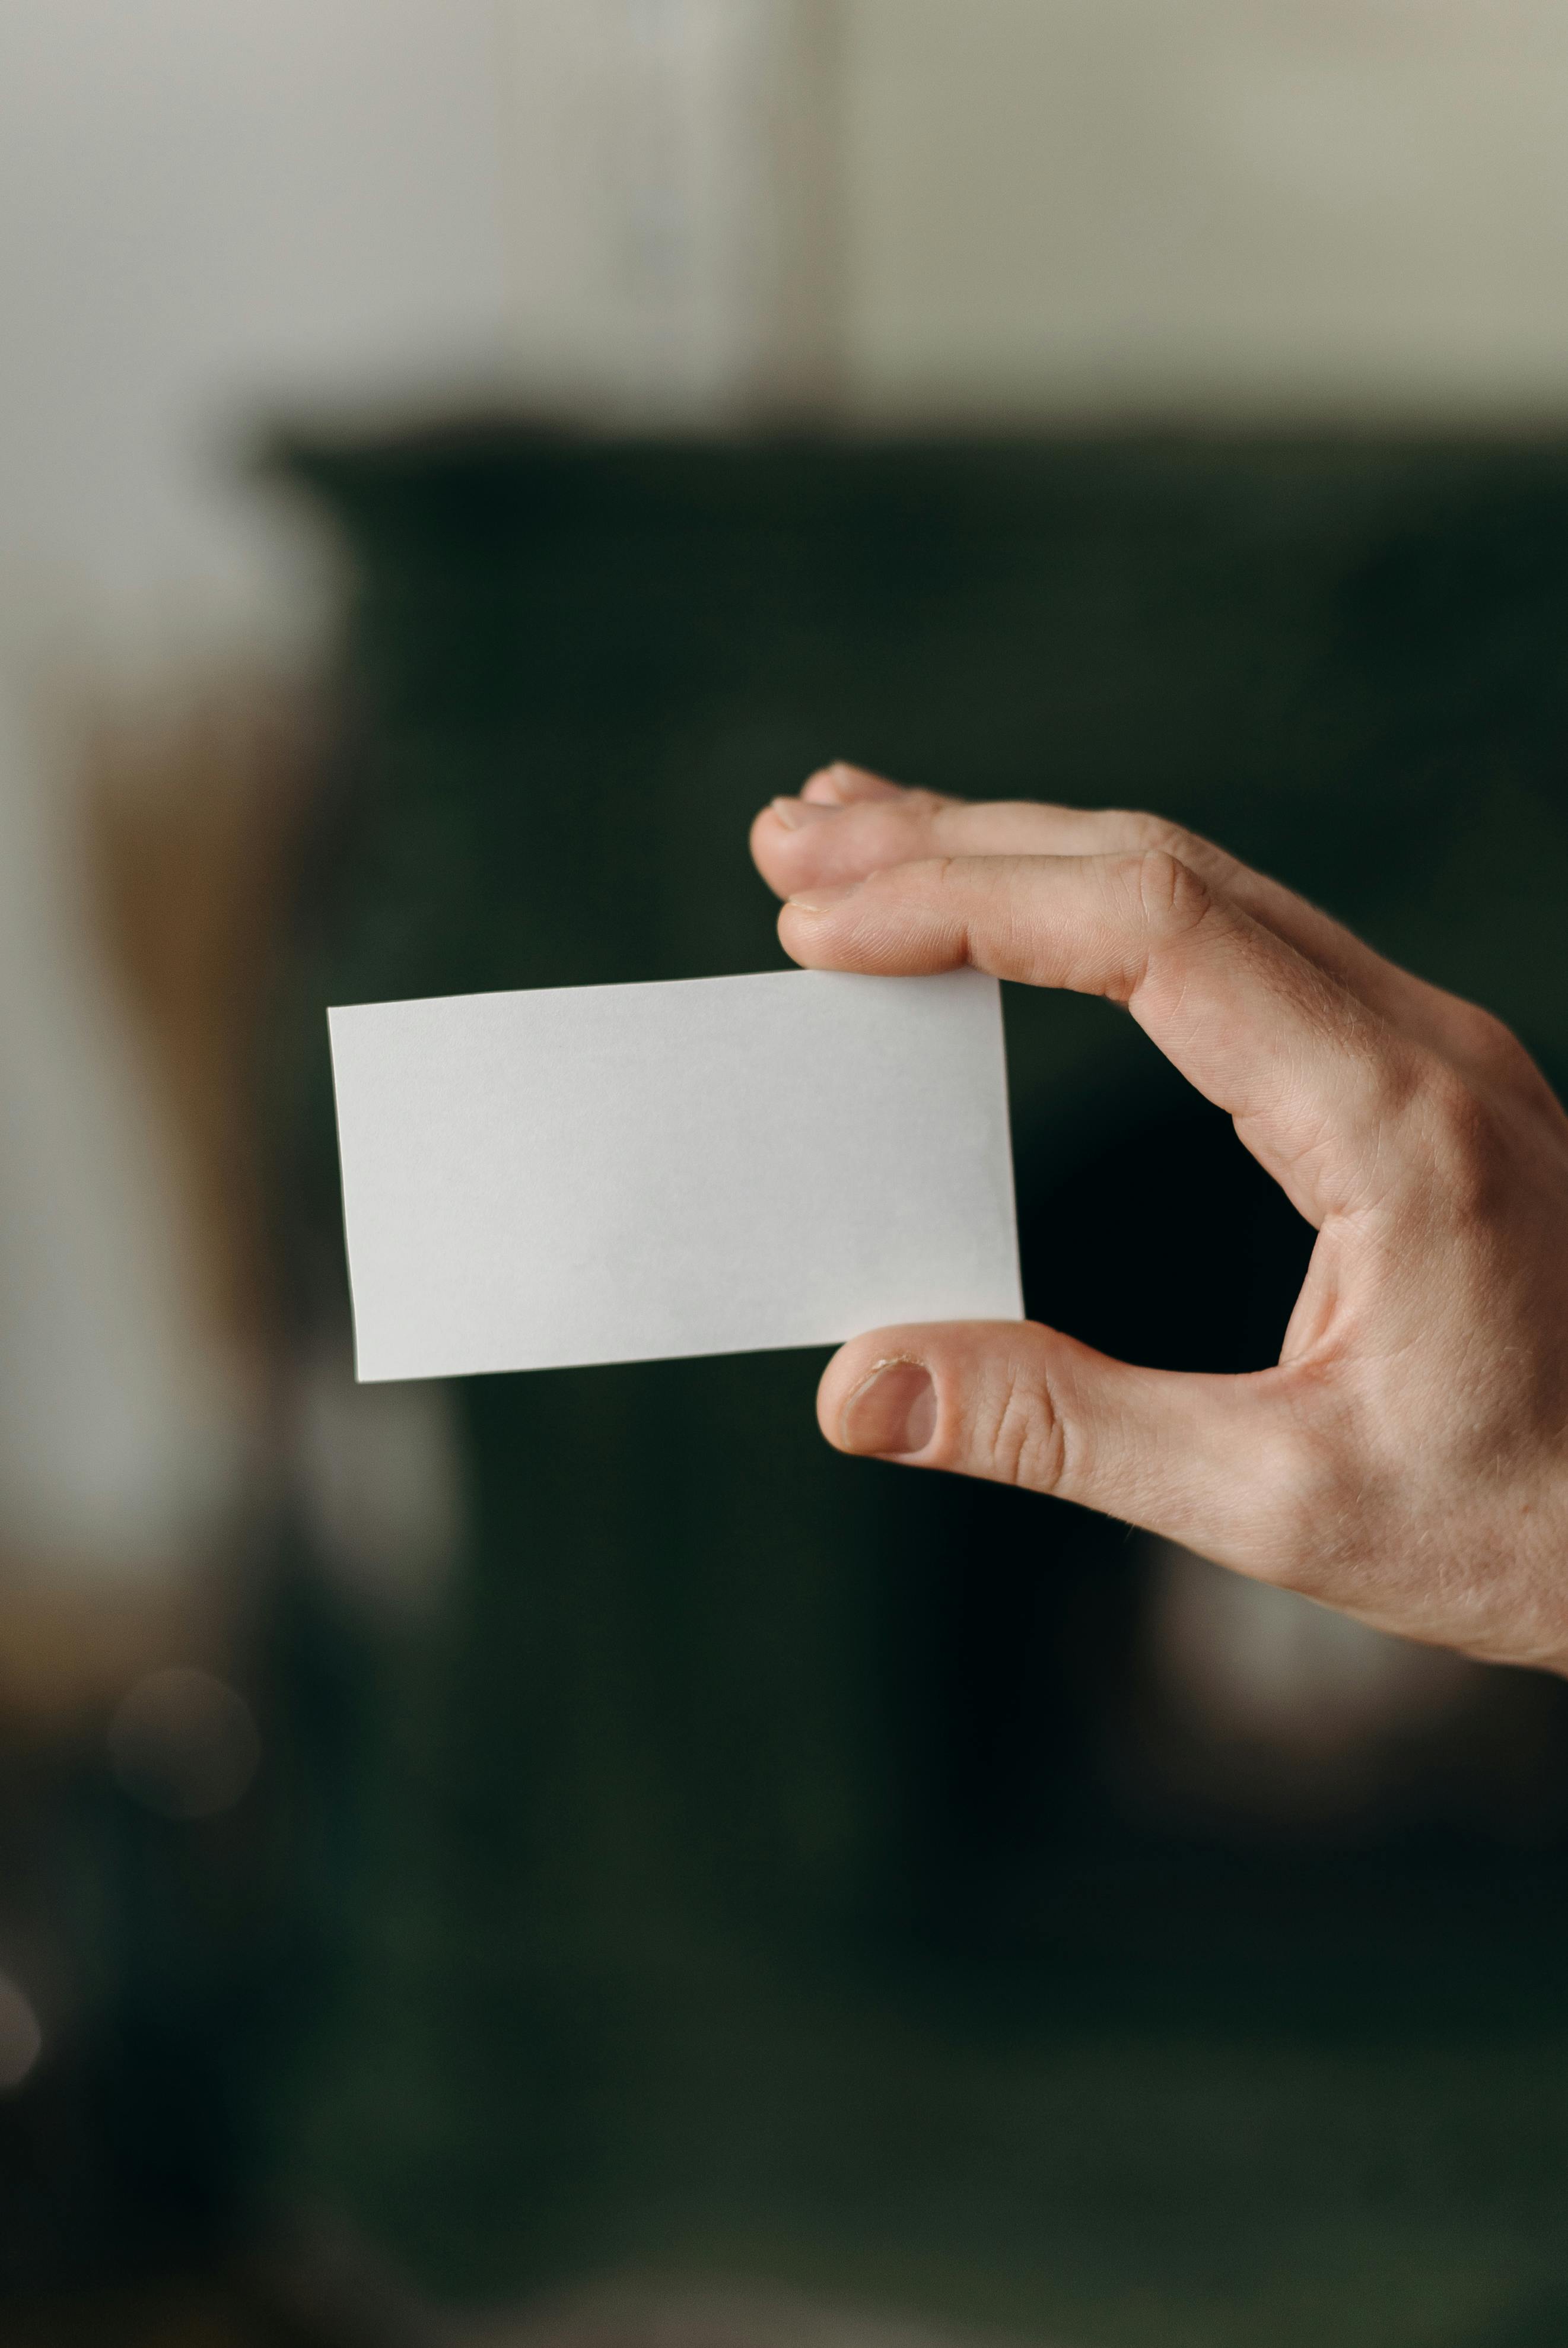 A person holding a piece of paper | Source: Pexels